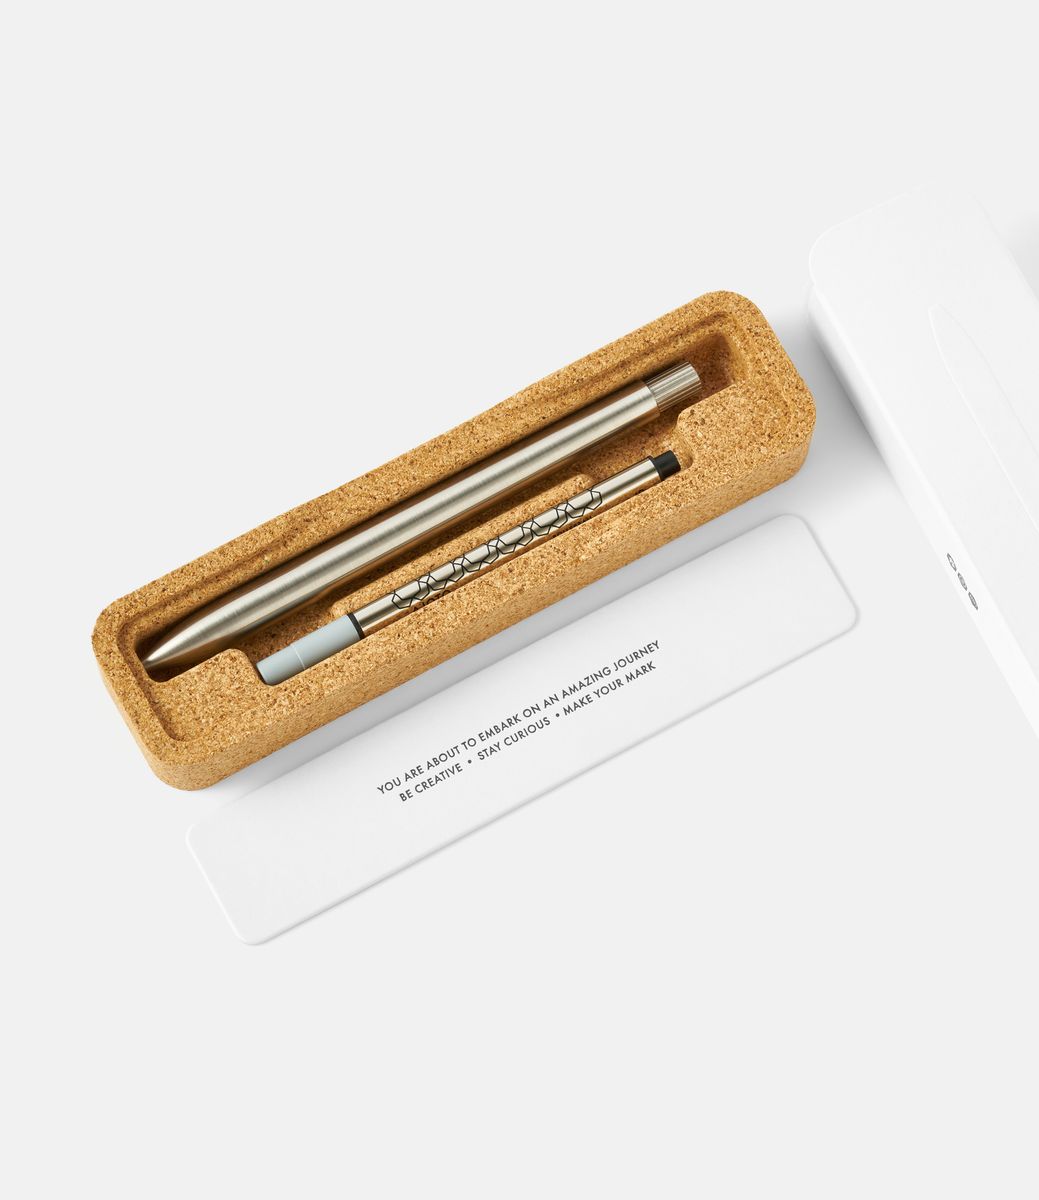 Ajoto The Pen Stainless Steel Natural Brushed — ручка-роллер из стали